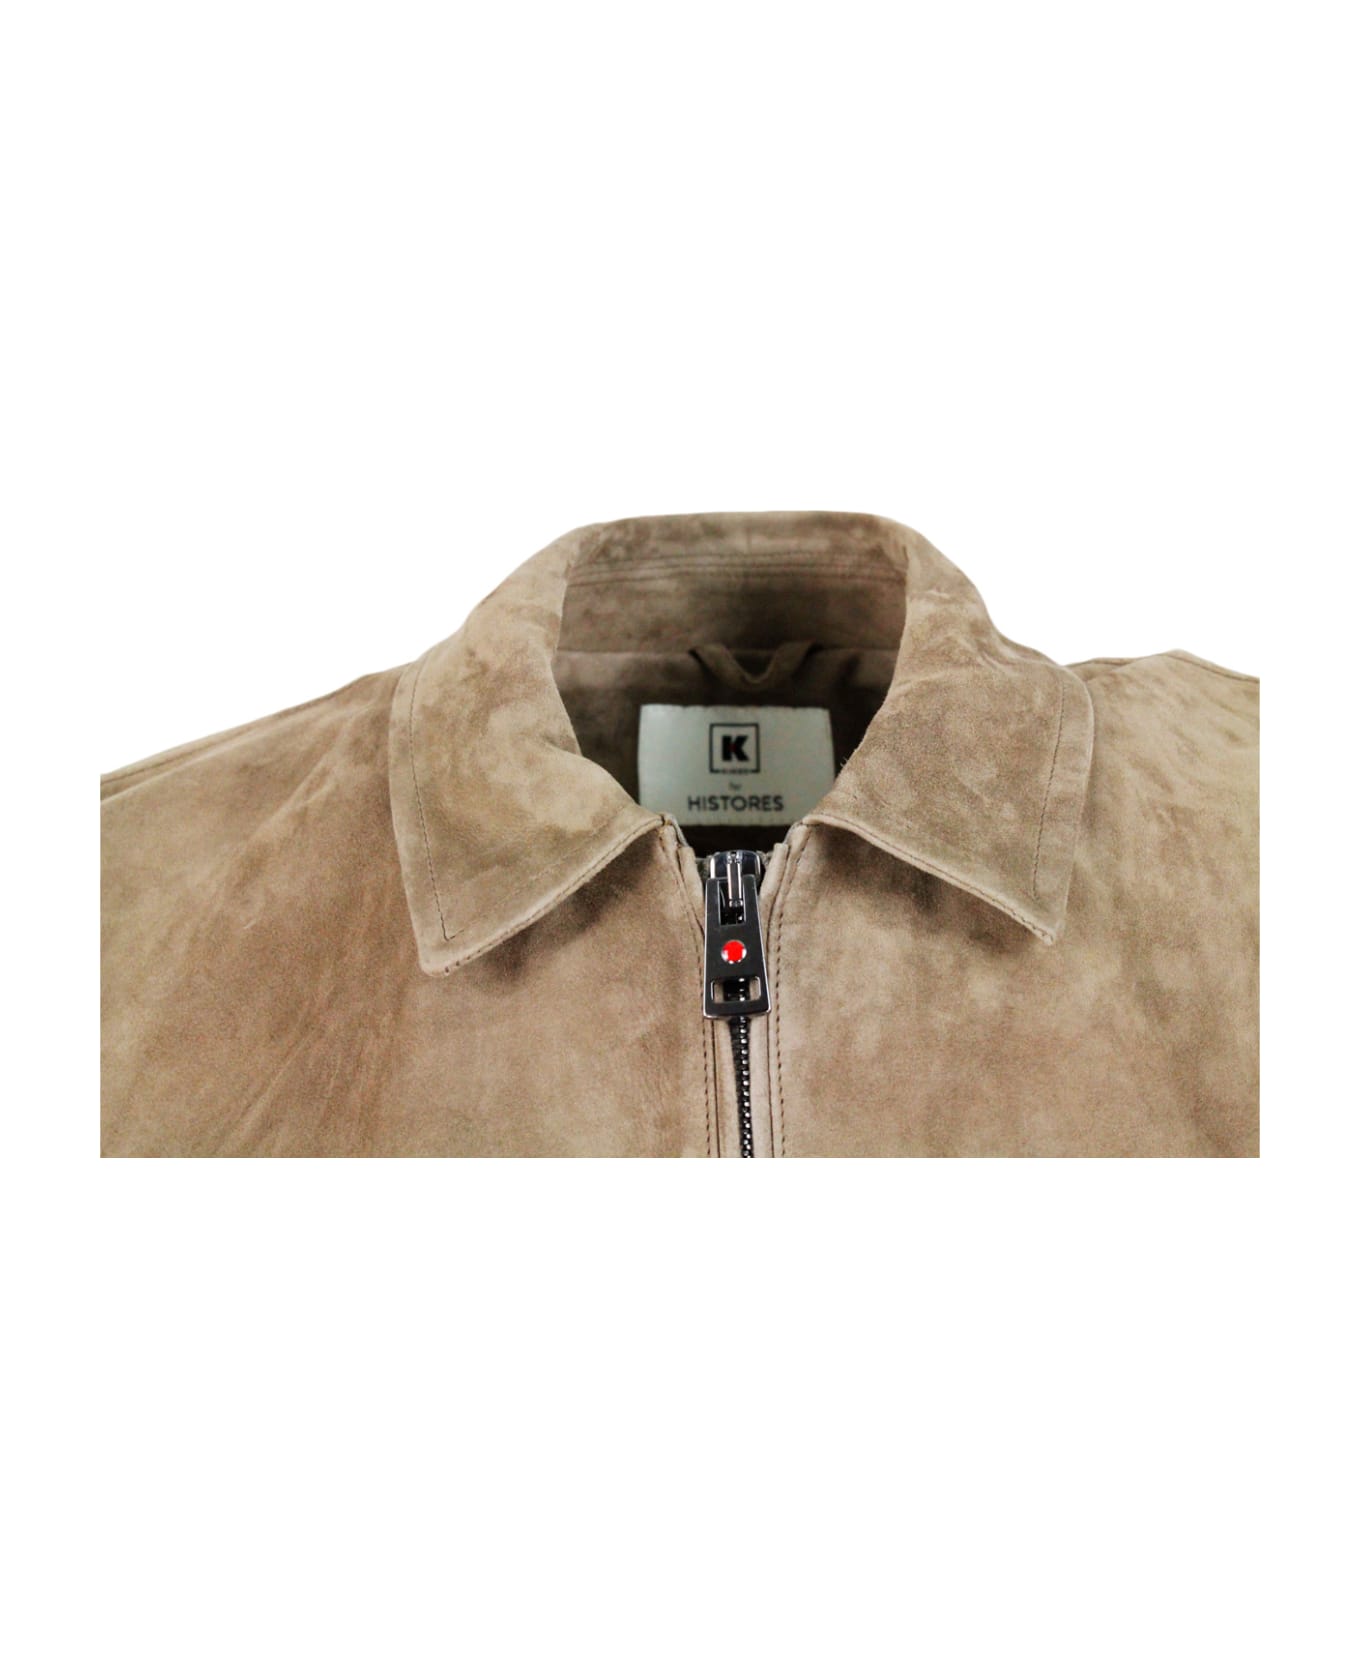 Kired Lightweight Unlined Jacket In Very Soft Suede With Shirt Collar And Zip Closure - Beige - dove  レザージャケット